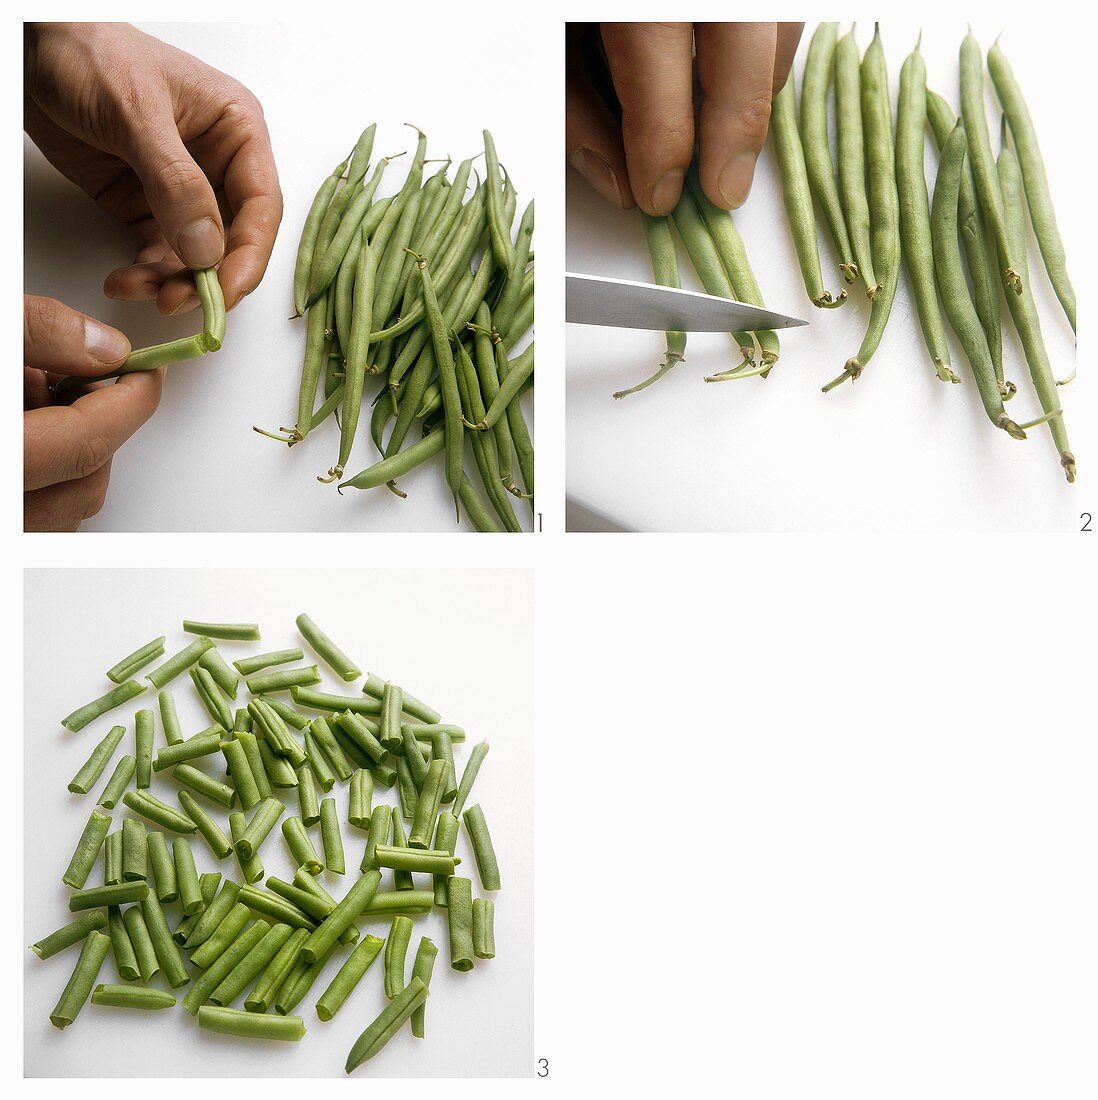 Breaking and slicing french beans